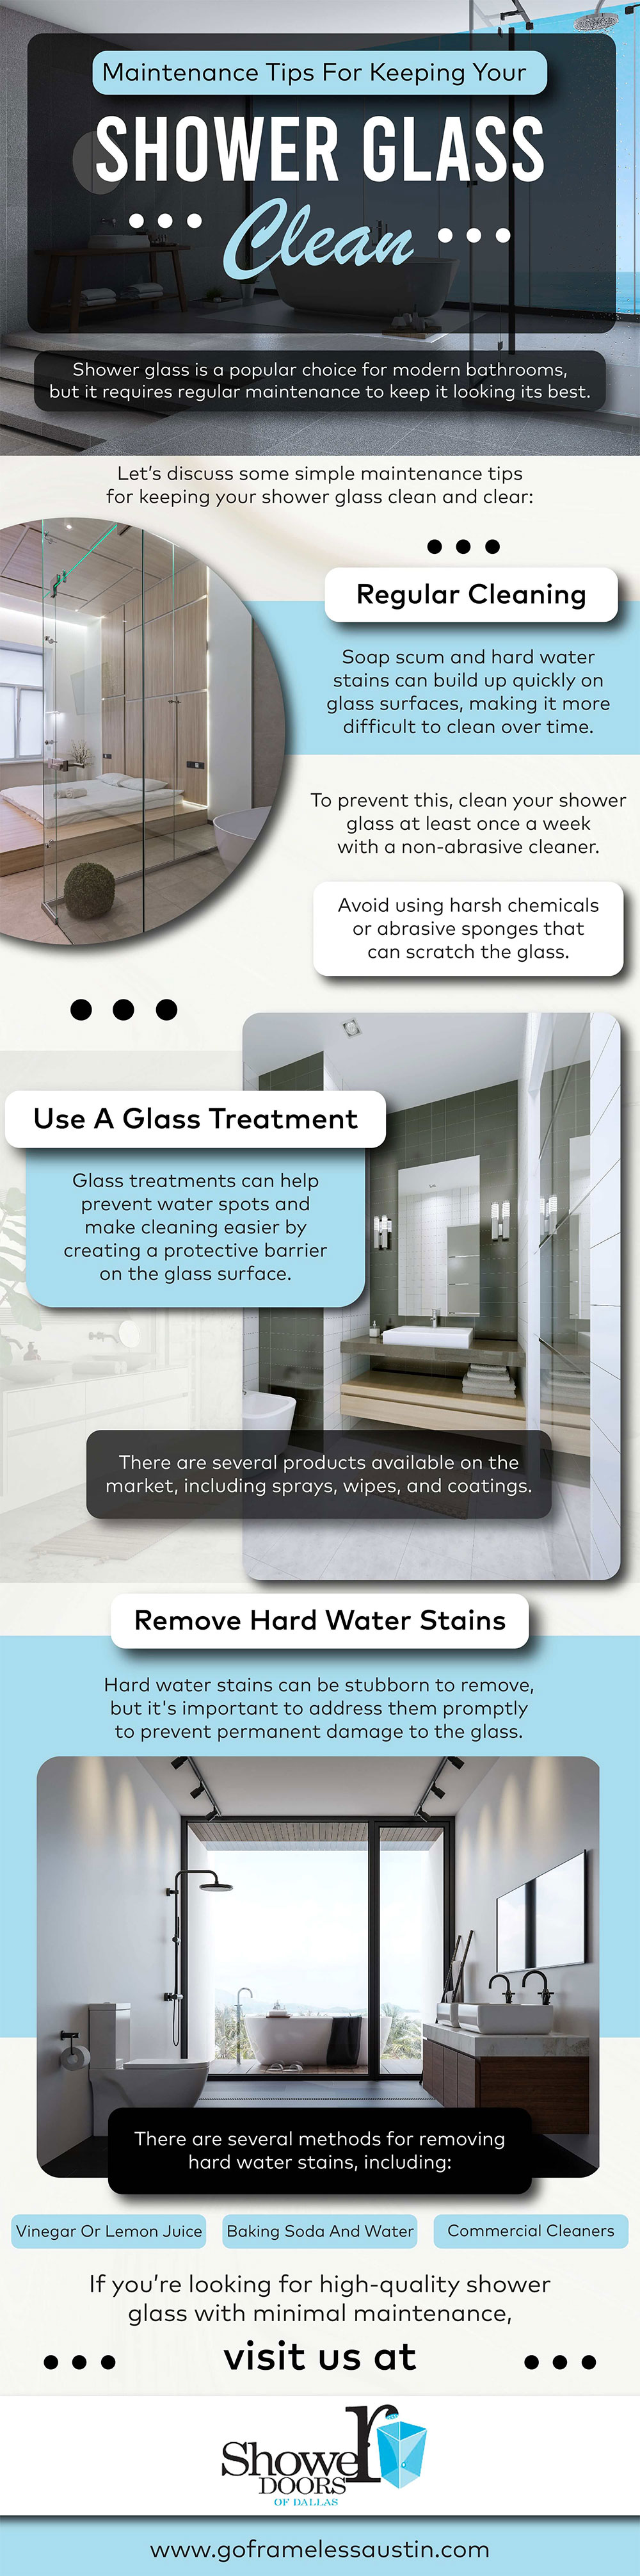 Maintenance Tips for Keeping your Shower Glass clean